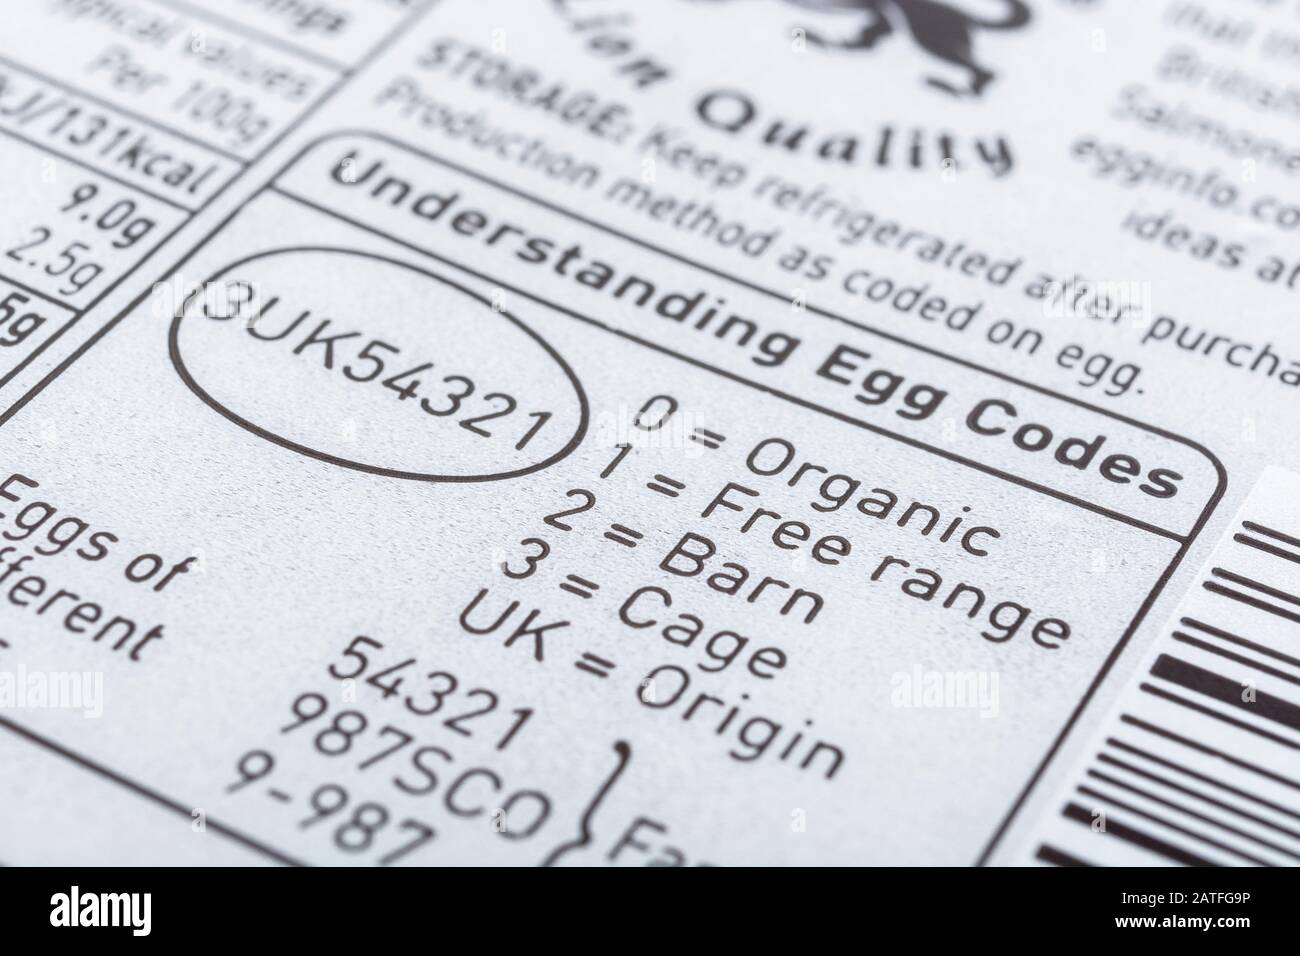 Close up food label on egg box from ASDA explaining UK Egg Codes. Shallow DoF macro - see additional notes. Food packaging, nutrition labels. Stock Photo